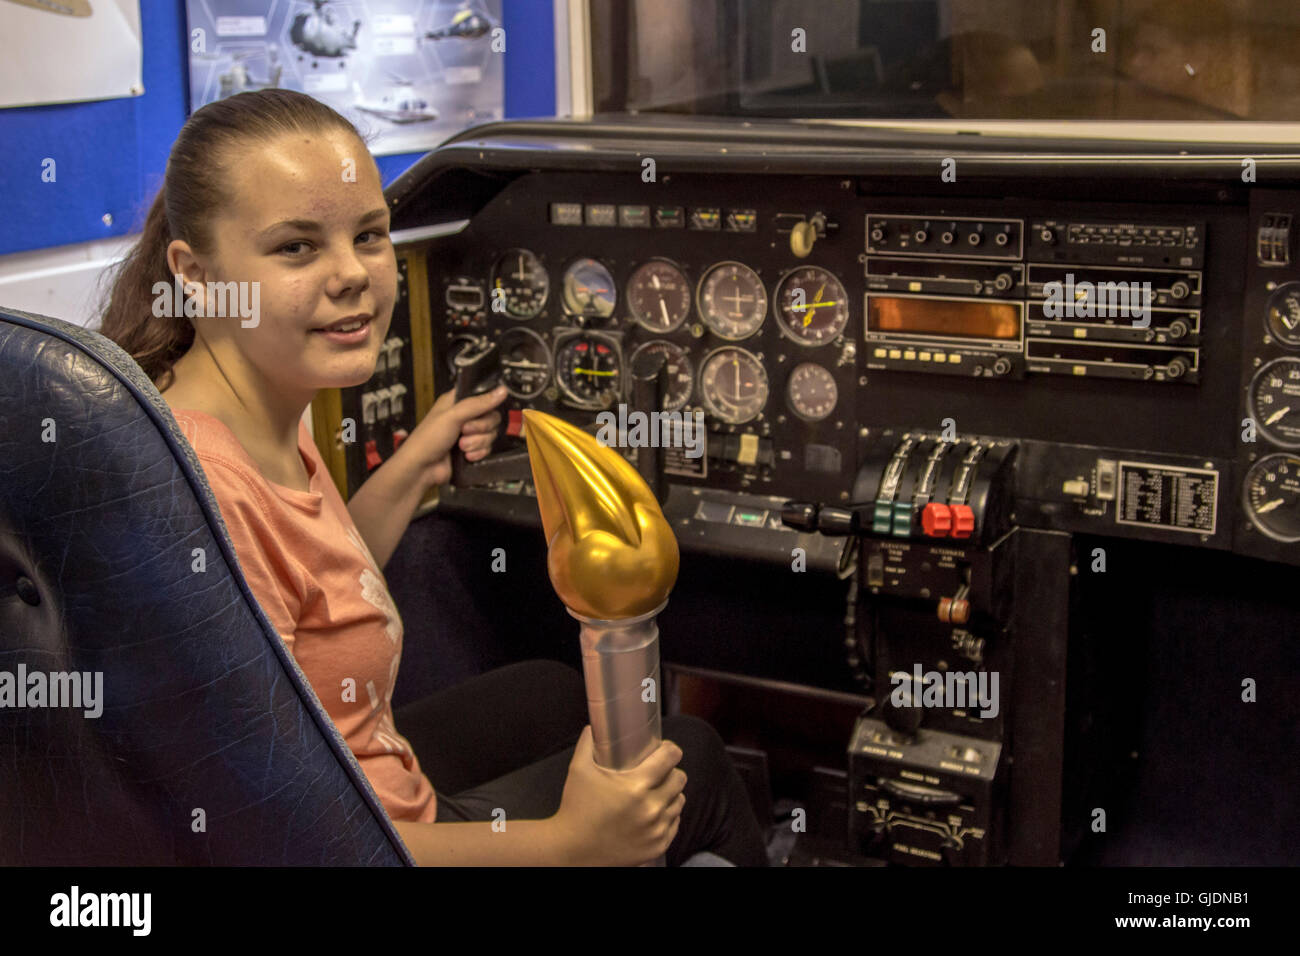 Essex-Uk - Royal Air Force Air Cadets celebrate 75th Anniversary with torch relay though Essex, UK. 14th Aug, 2016. Cadet using flight sim with torch Credit:  darren Attersley/Alamy Live News Stock Photo